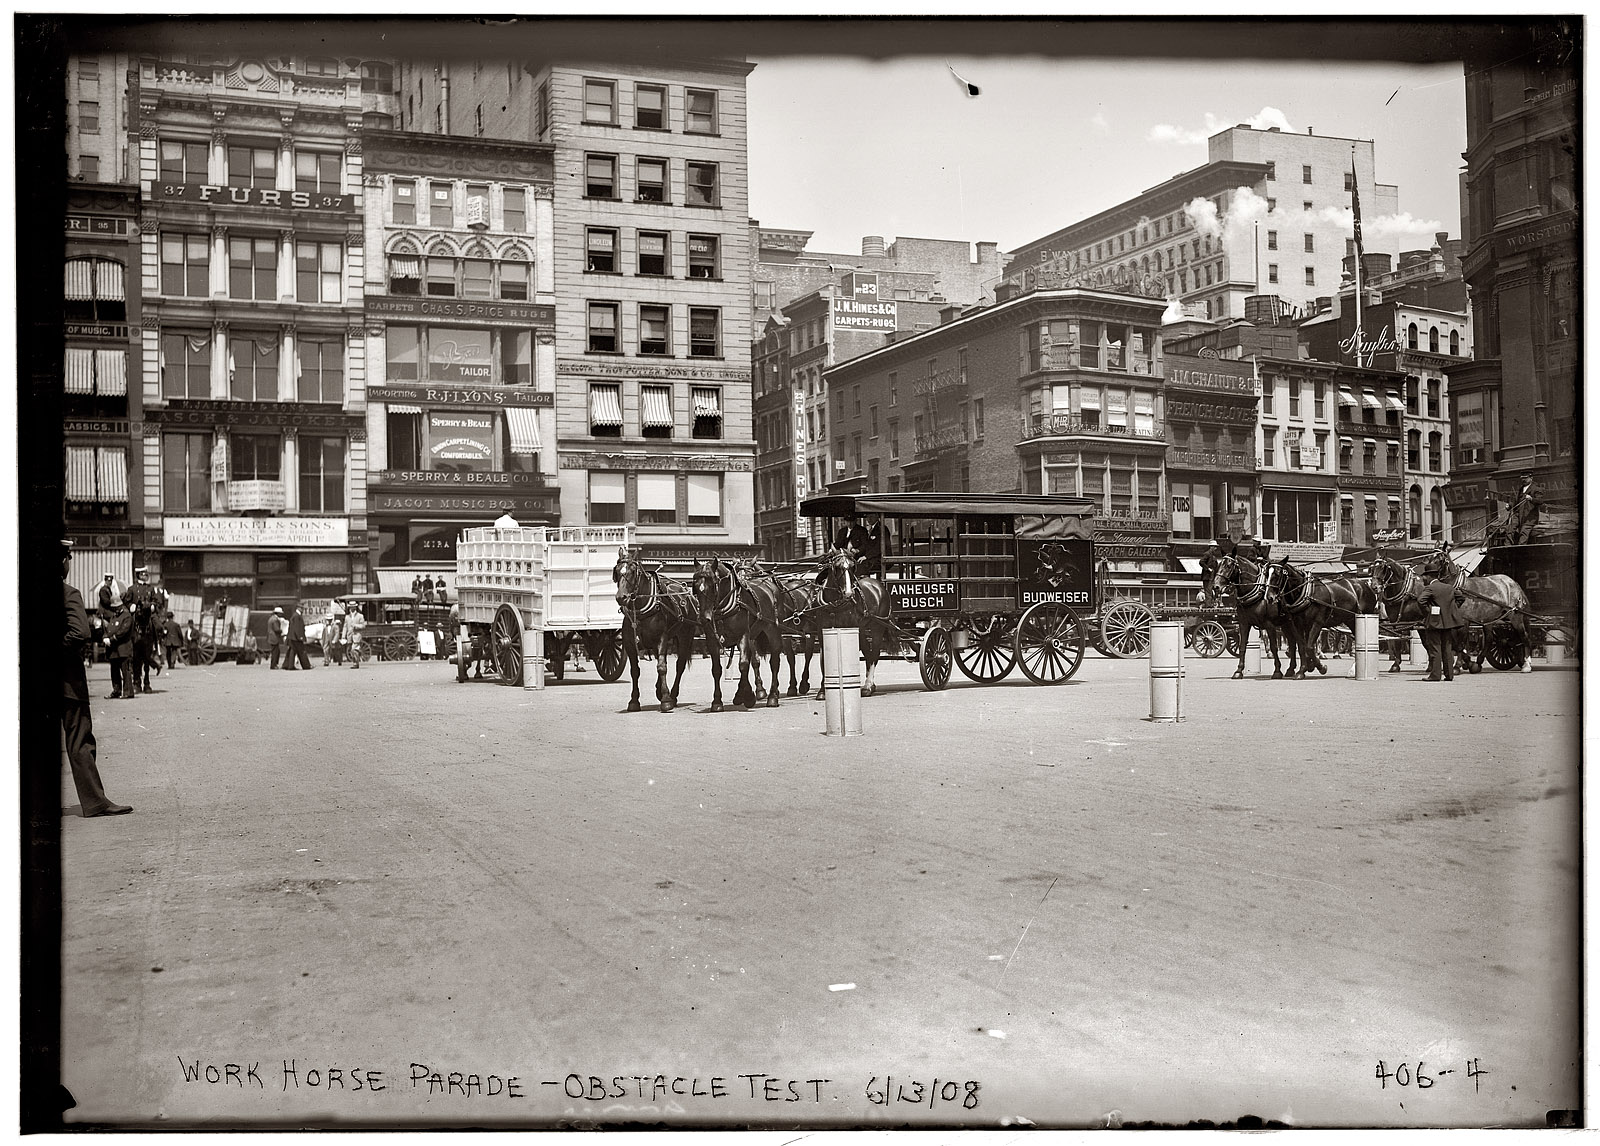 "Work Horse Parade - Obstacle Test" on Union Square in New York. Anheuser-Busch and Borden teams. June 13, 1908. View full size. 5x7 glass negative, George Grantham Bain Collection.